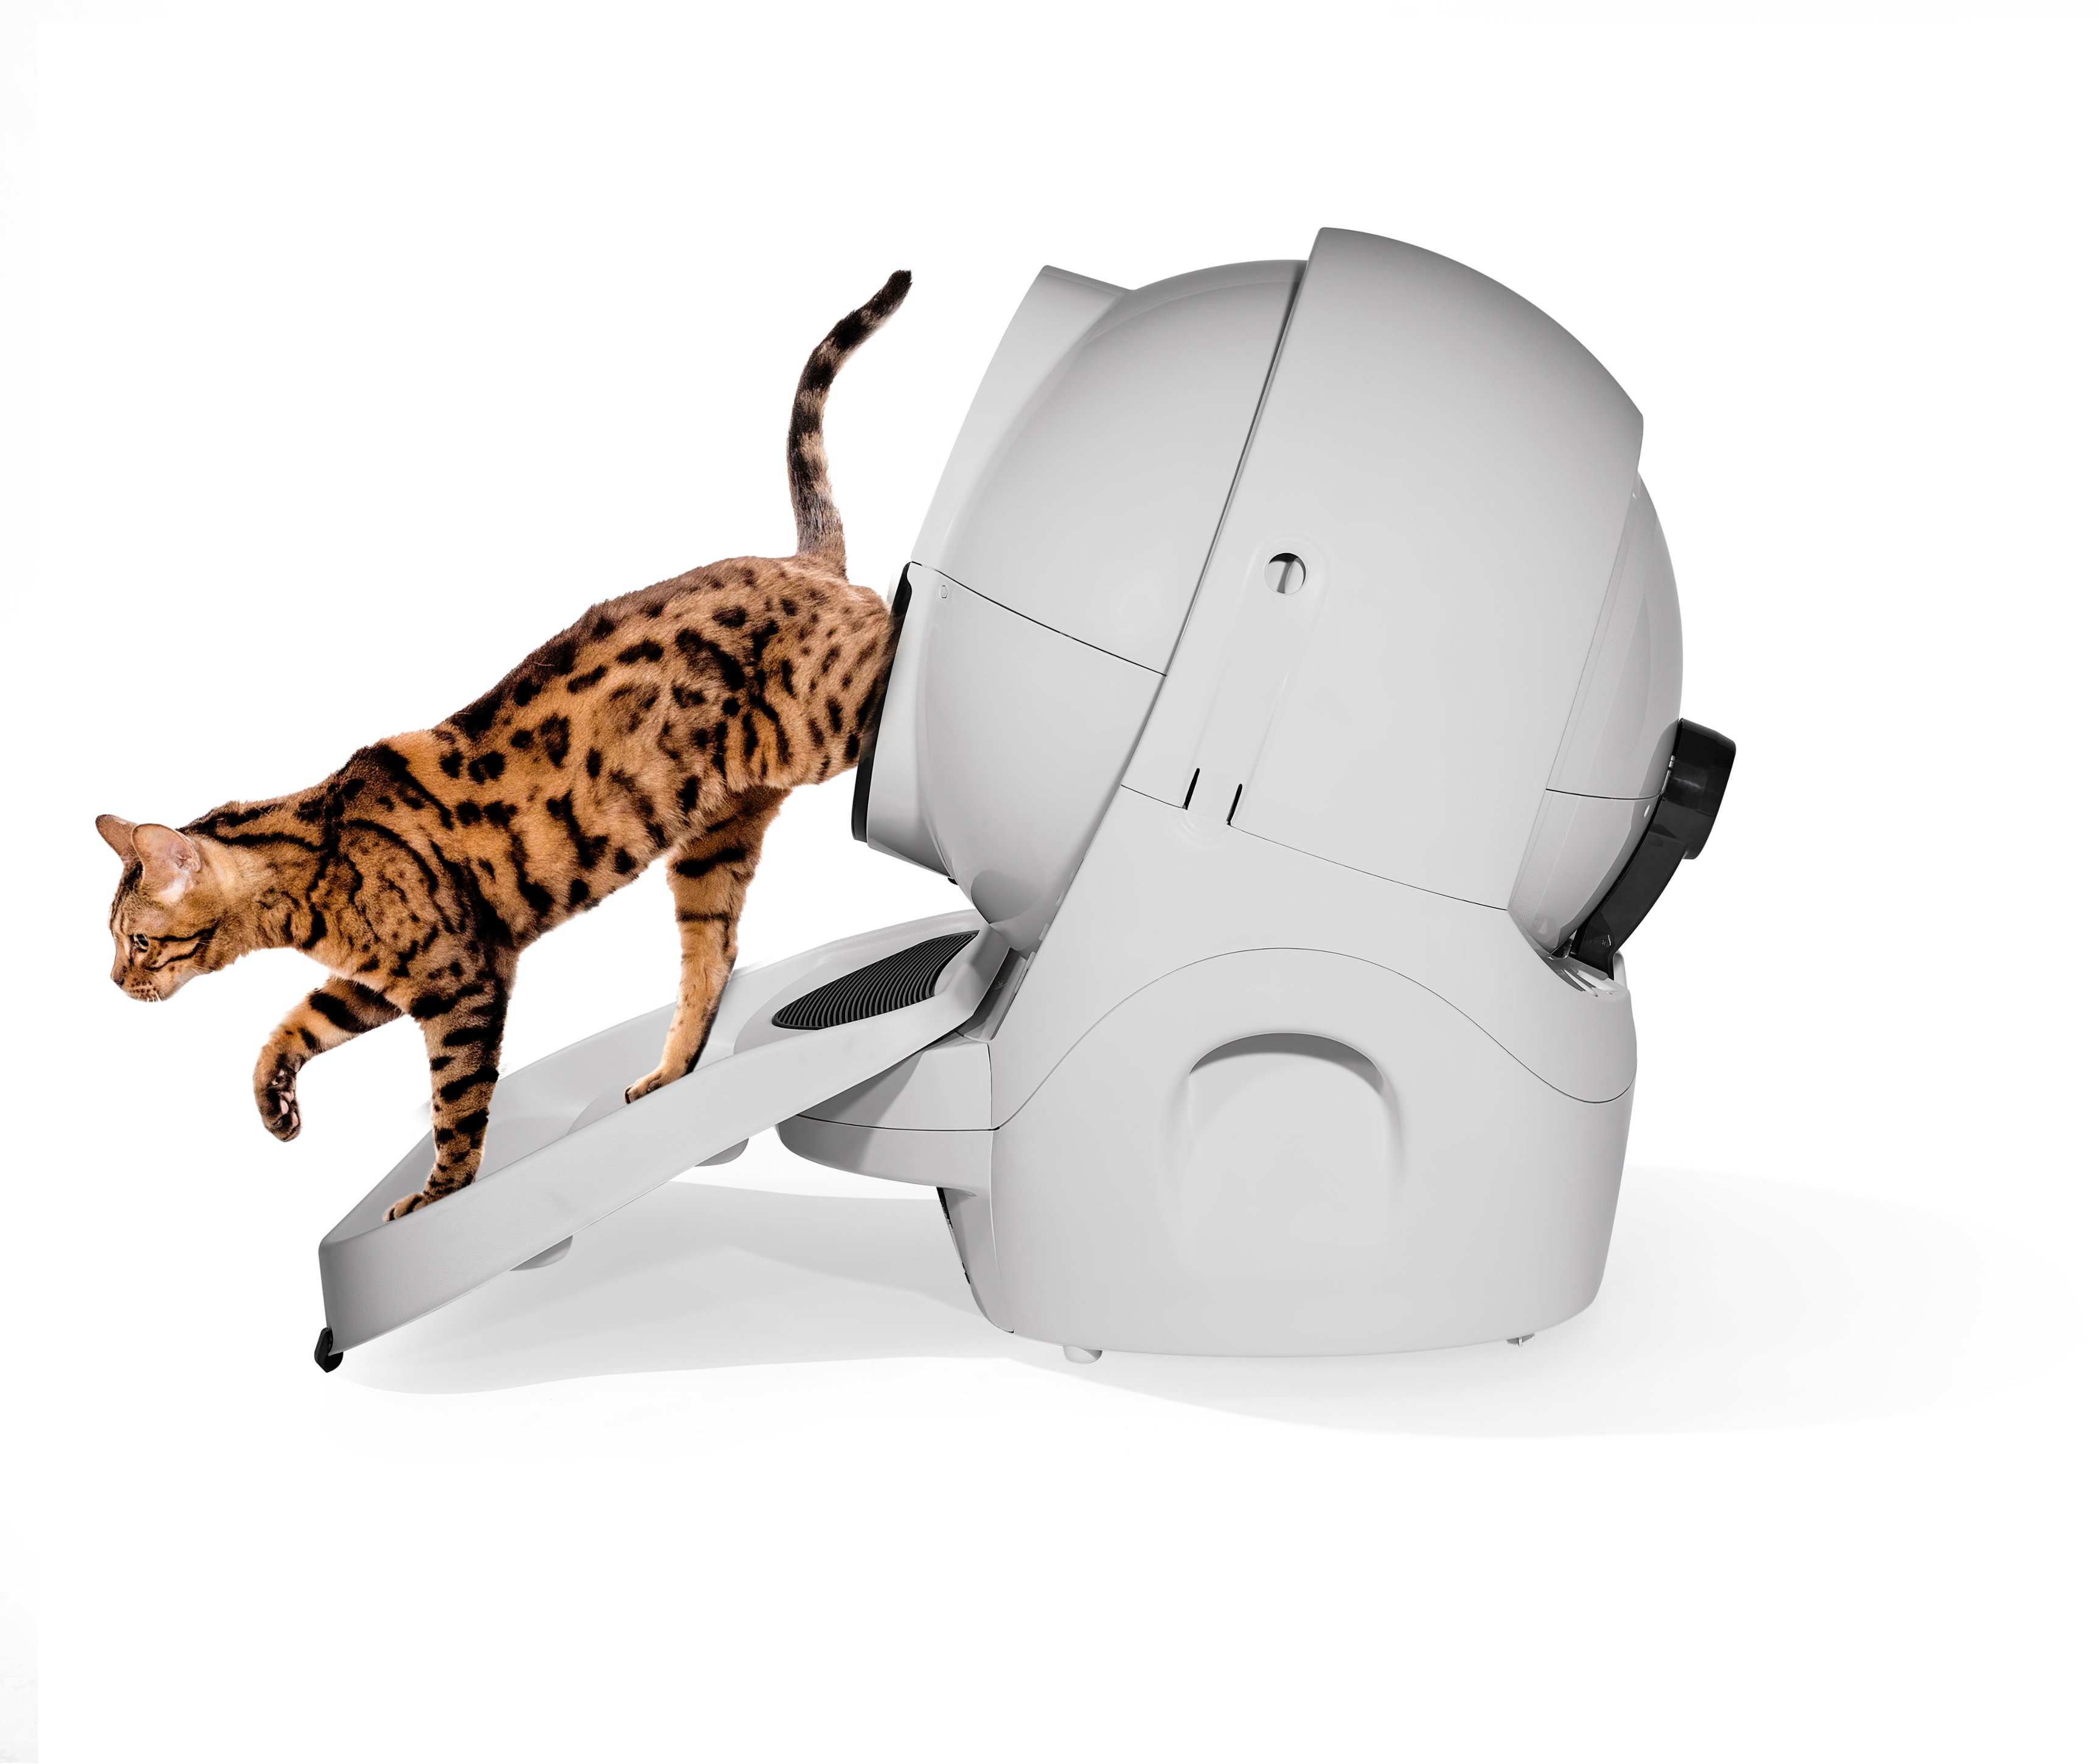 Whisker Litter-Robot 3 Connect Core Accessories Bundle WiFi-Enabled